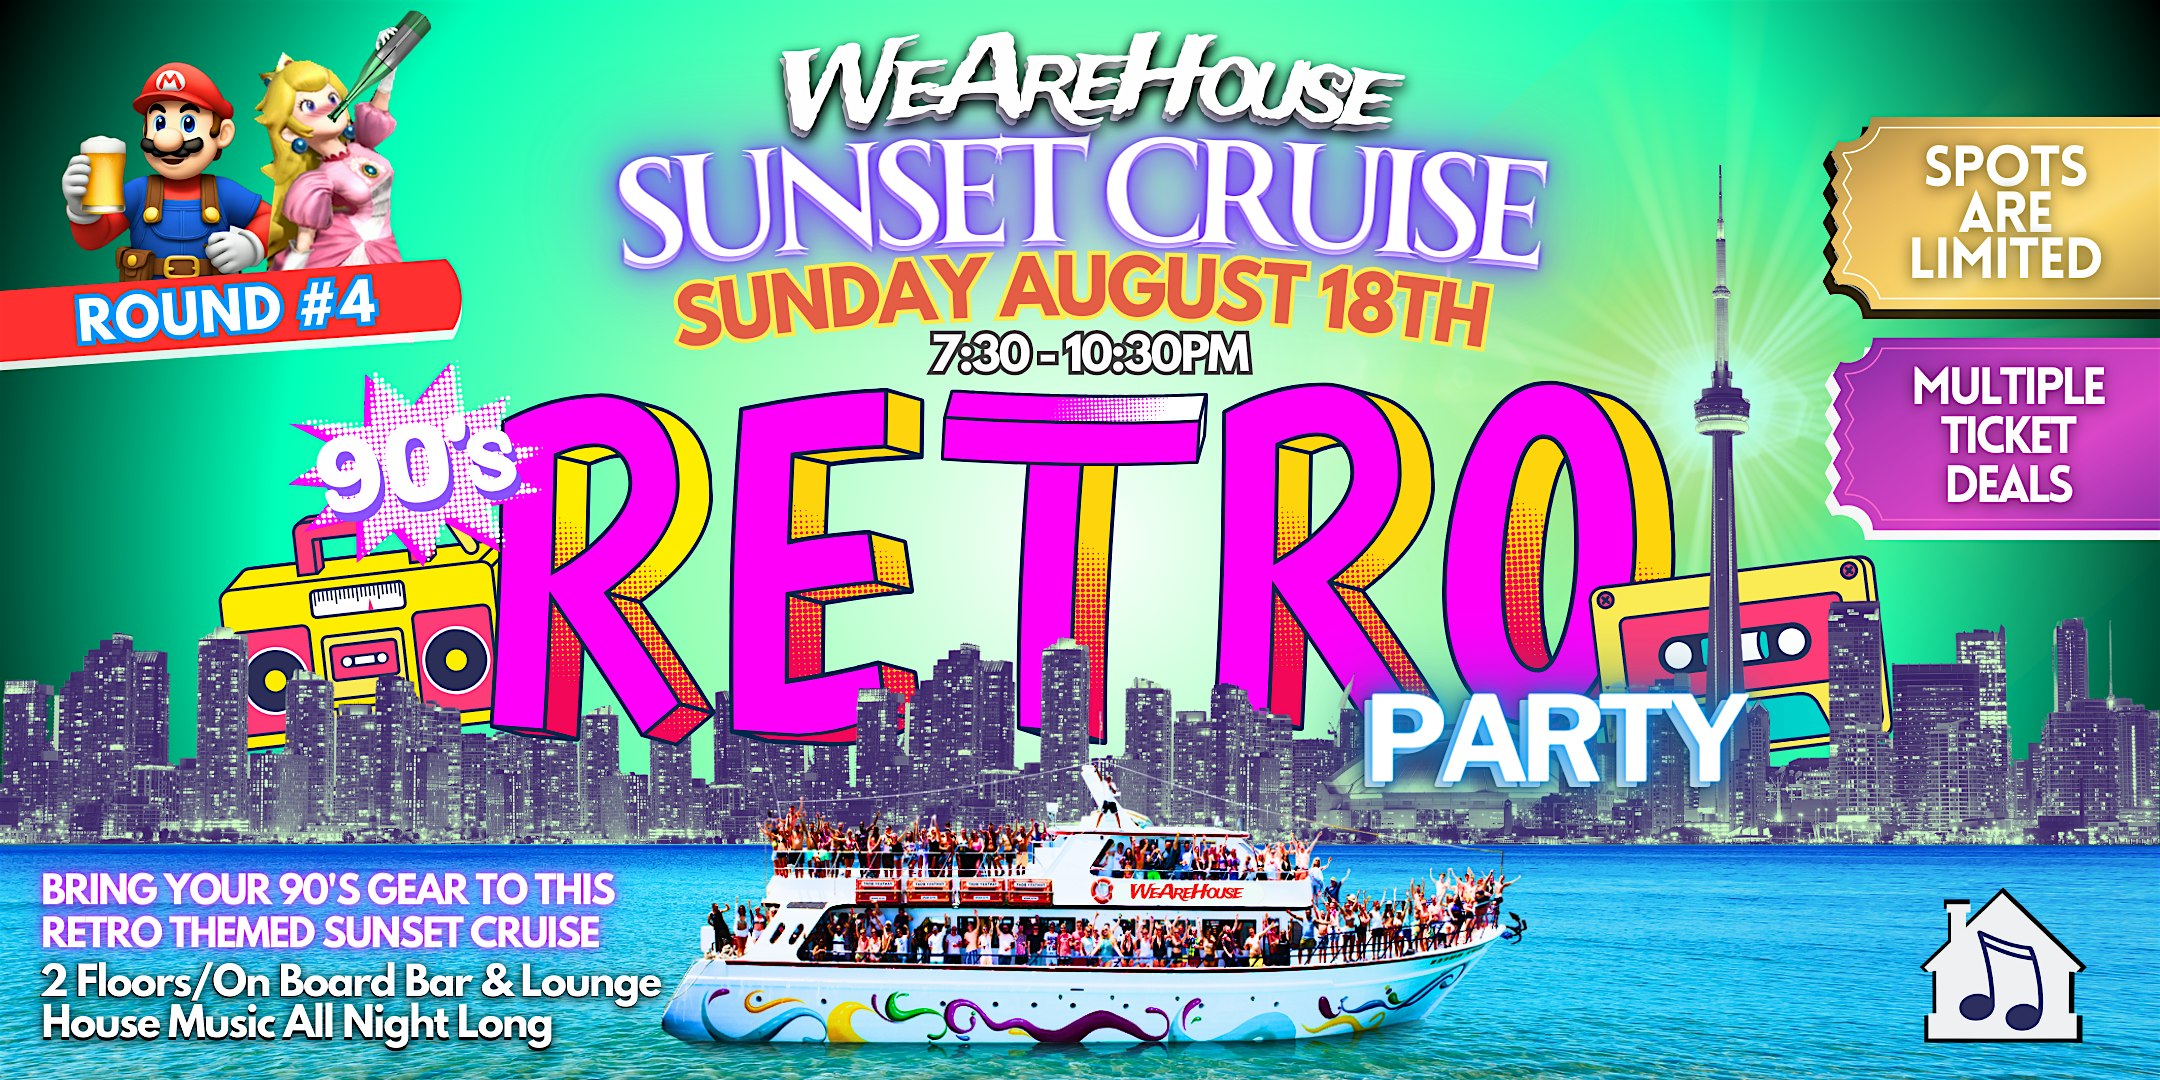 WeAreHouse - SUNSET CRUISE | 90's RETRO PARTY - Aug 18th